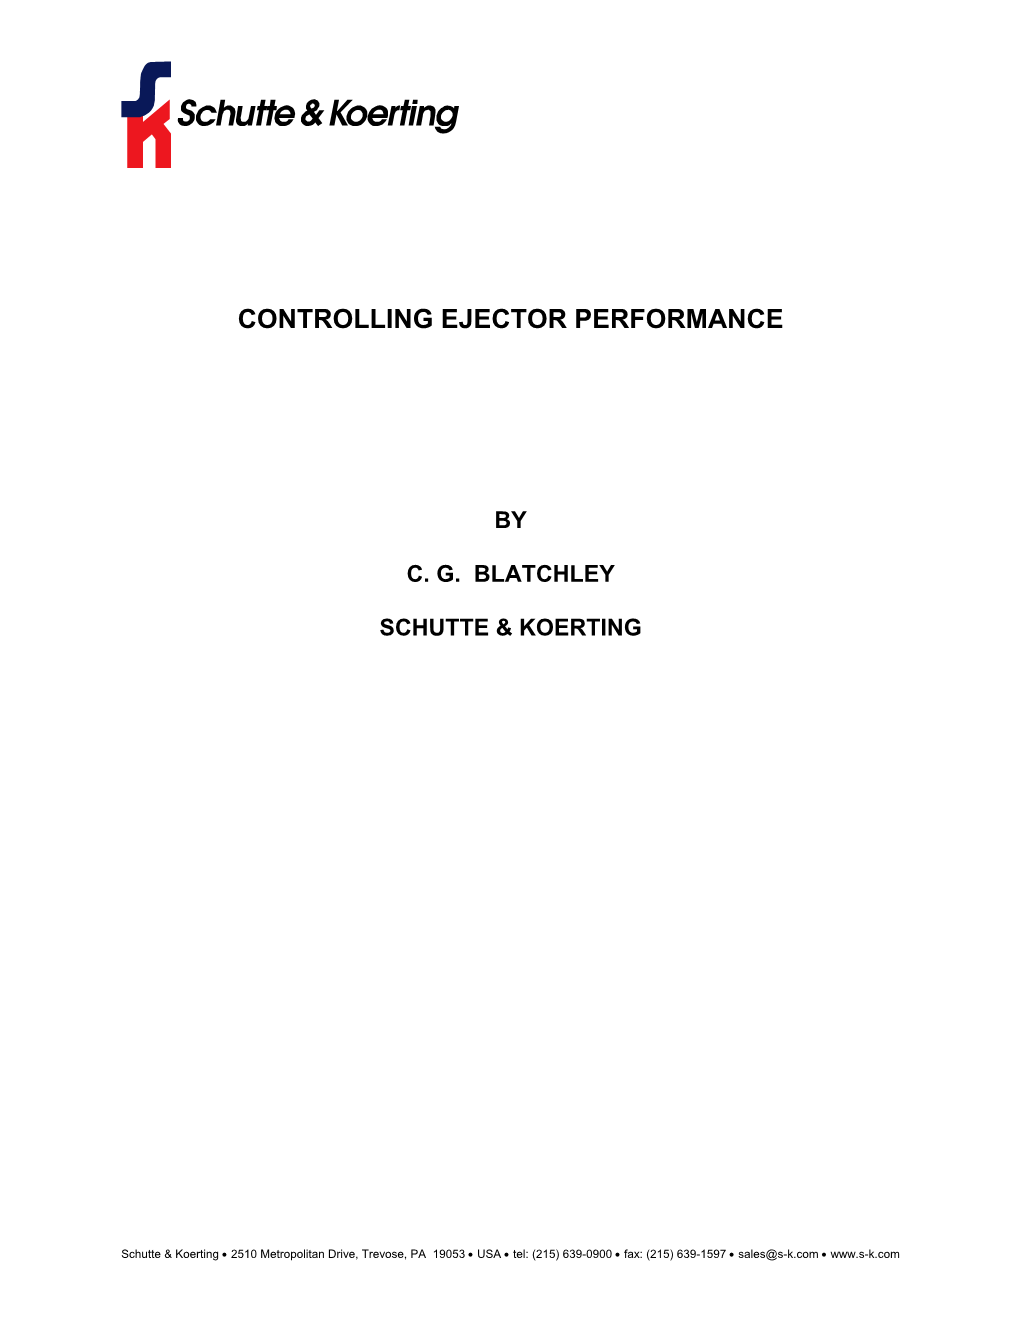 Controlling Ejector Performance